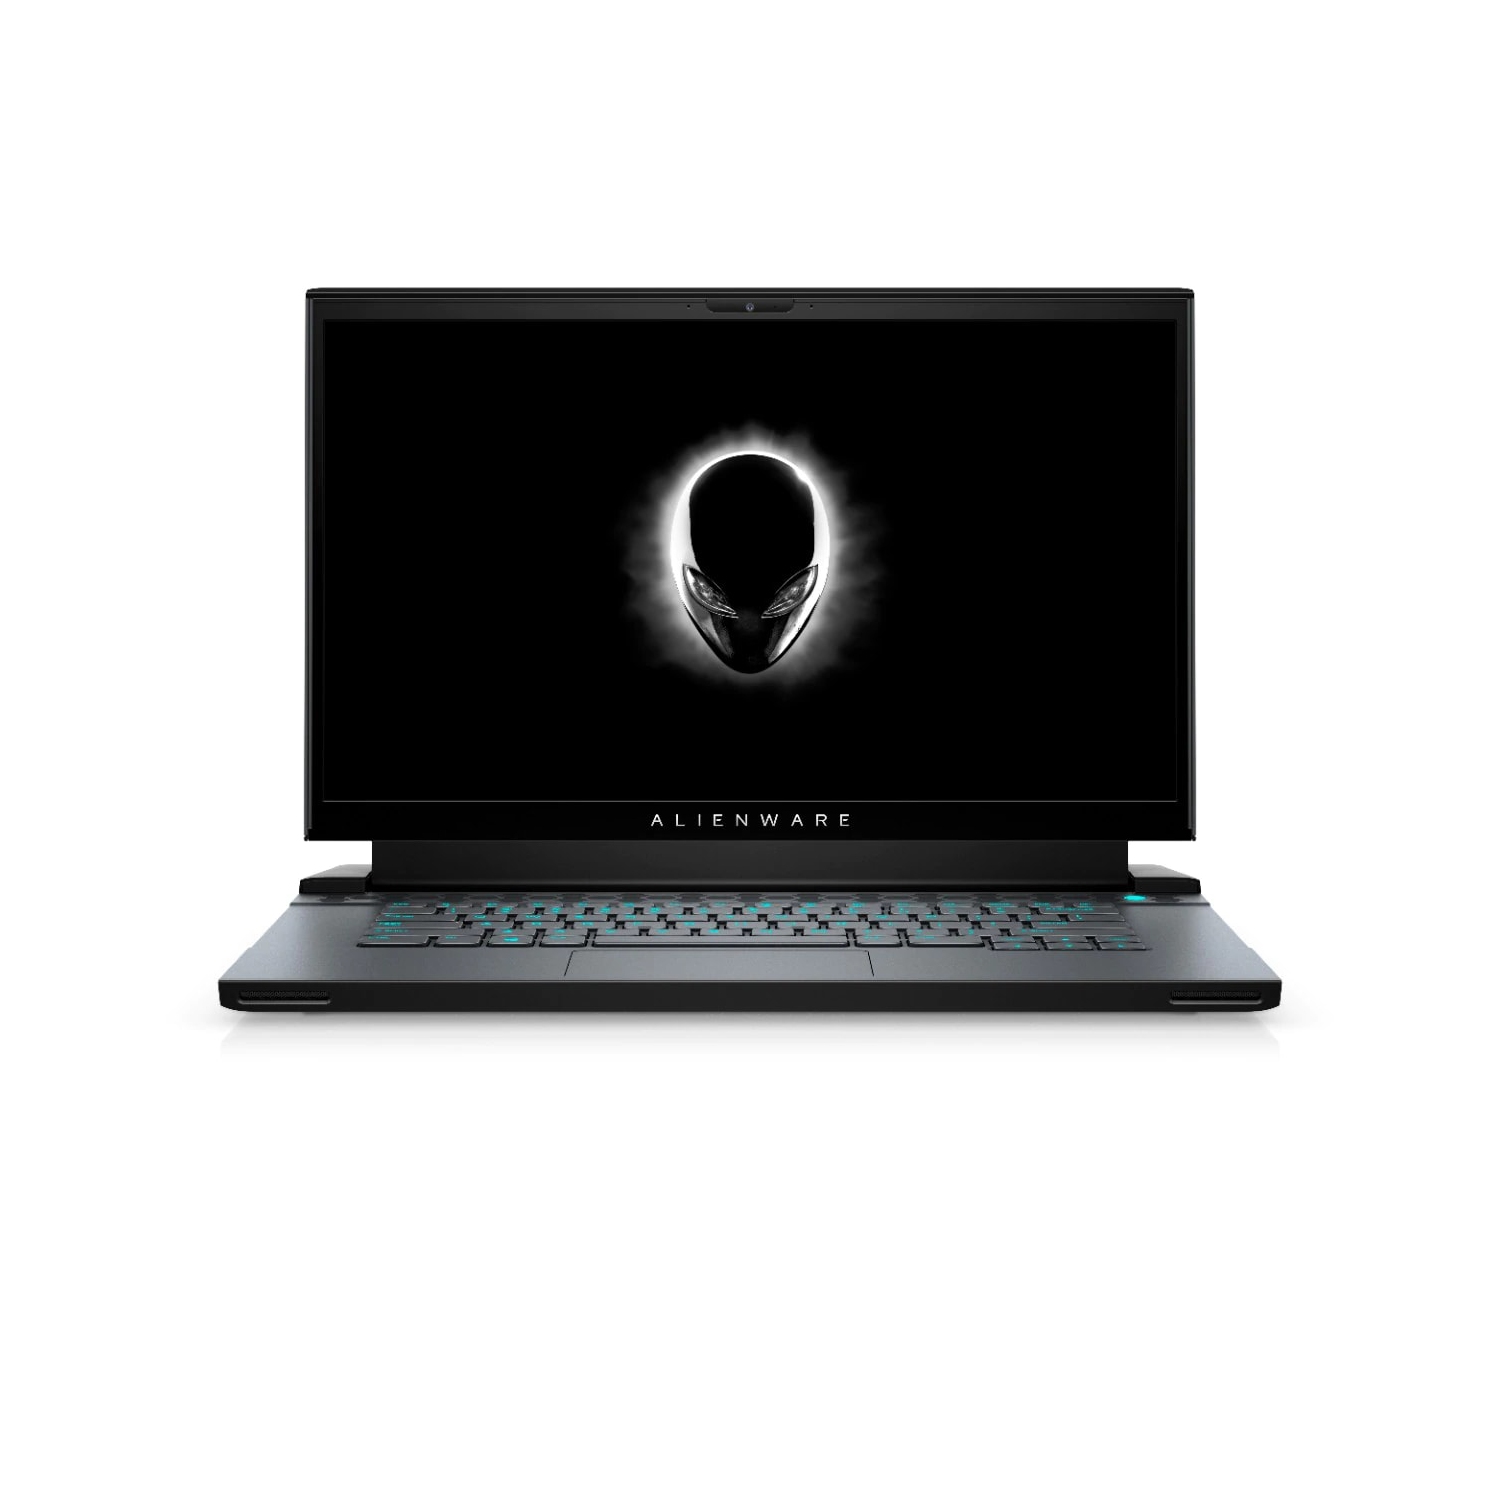 Refurbished (Excellent) - Dell Alienware m15 R4 Gaming Laptop (2021), 15.6" FHD, Core i7, 2TB SSD + 2TB SSD, 32GB RAM, RTX 3080, 5 GHz, 10th Gen CPU Certified Refurbished